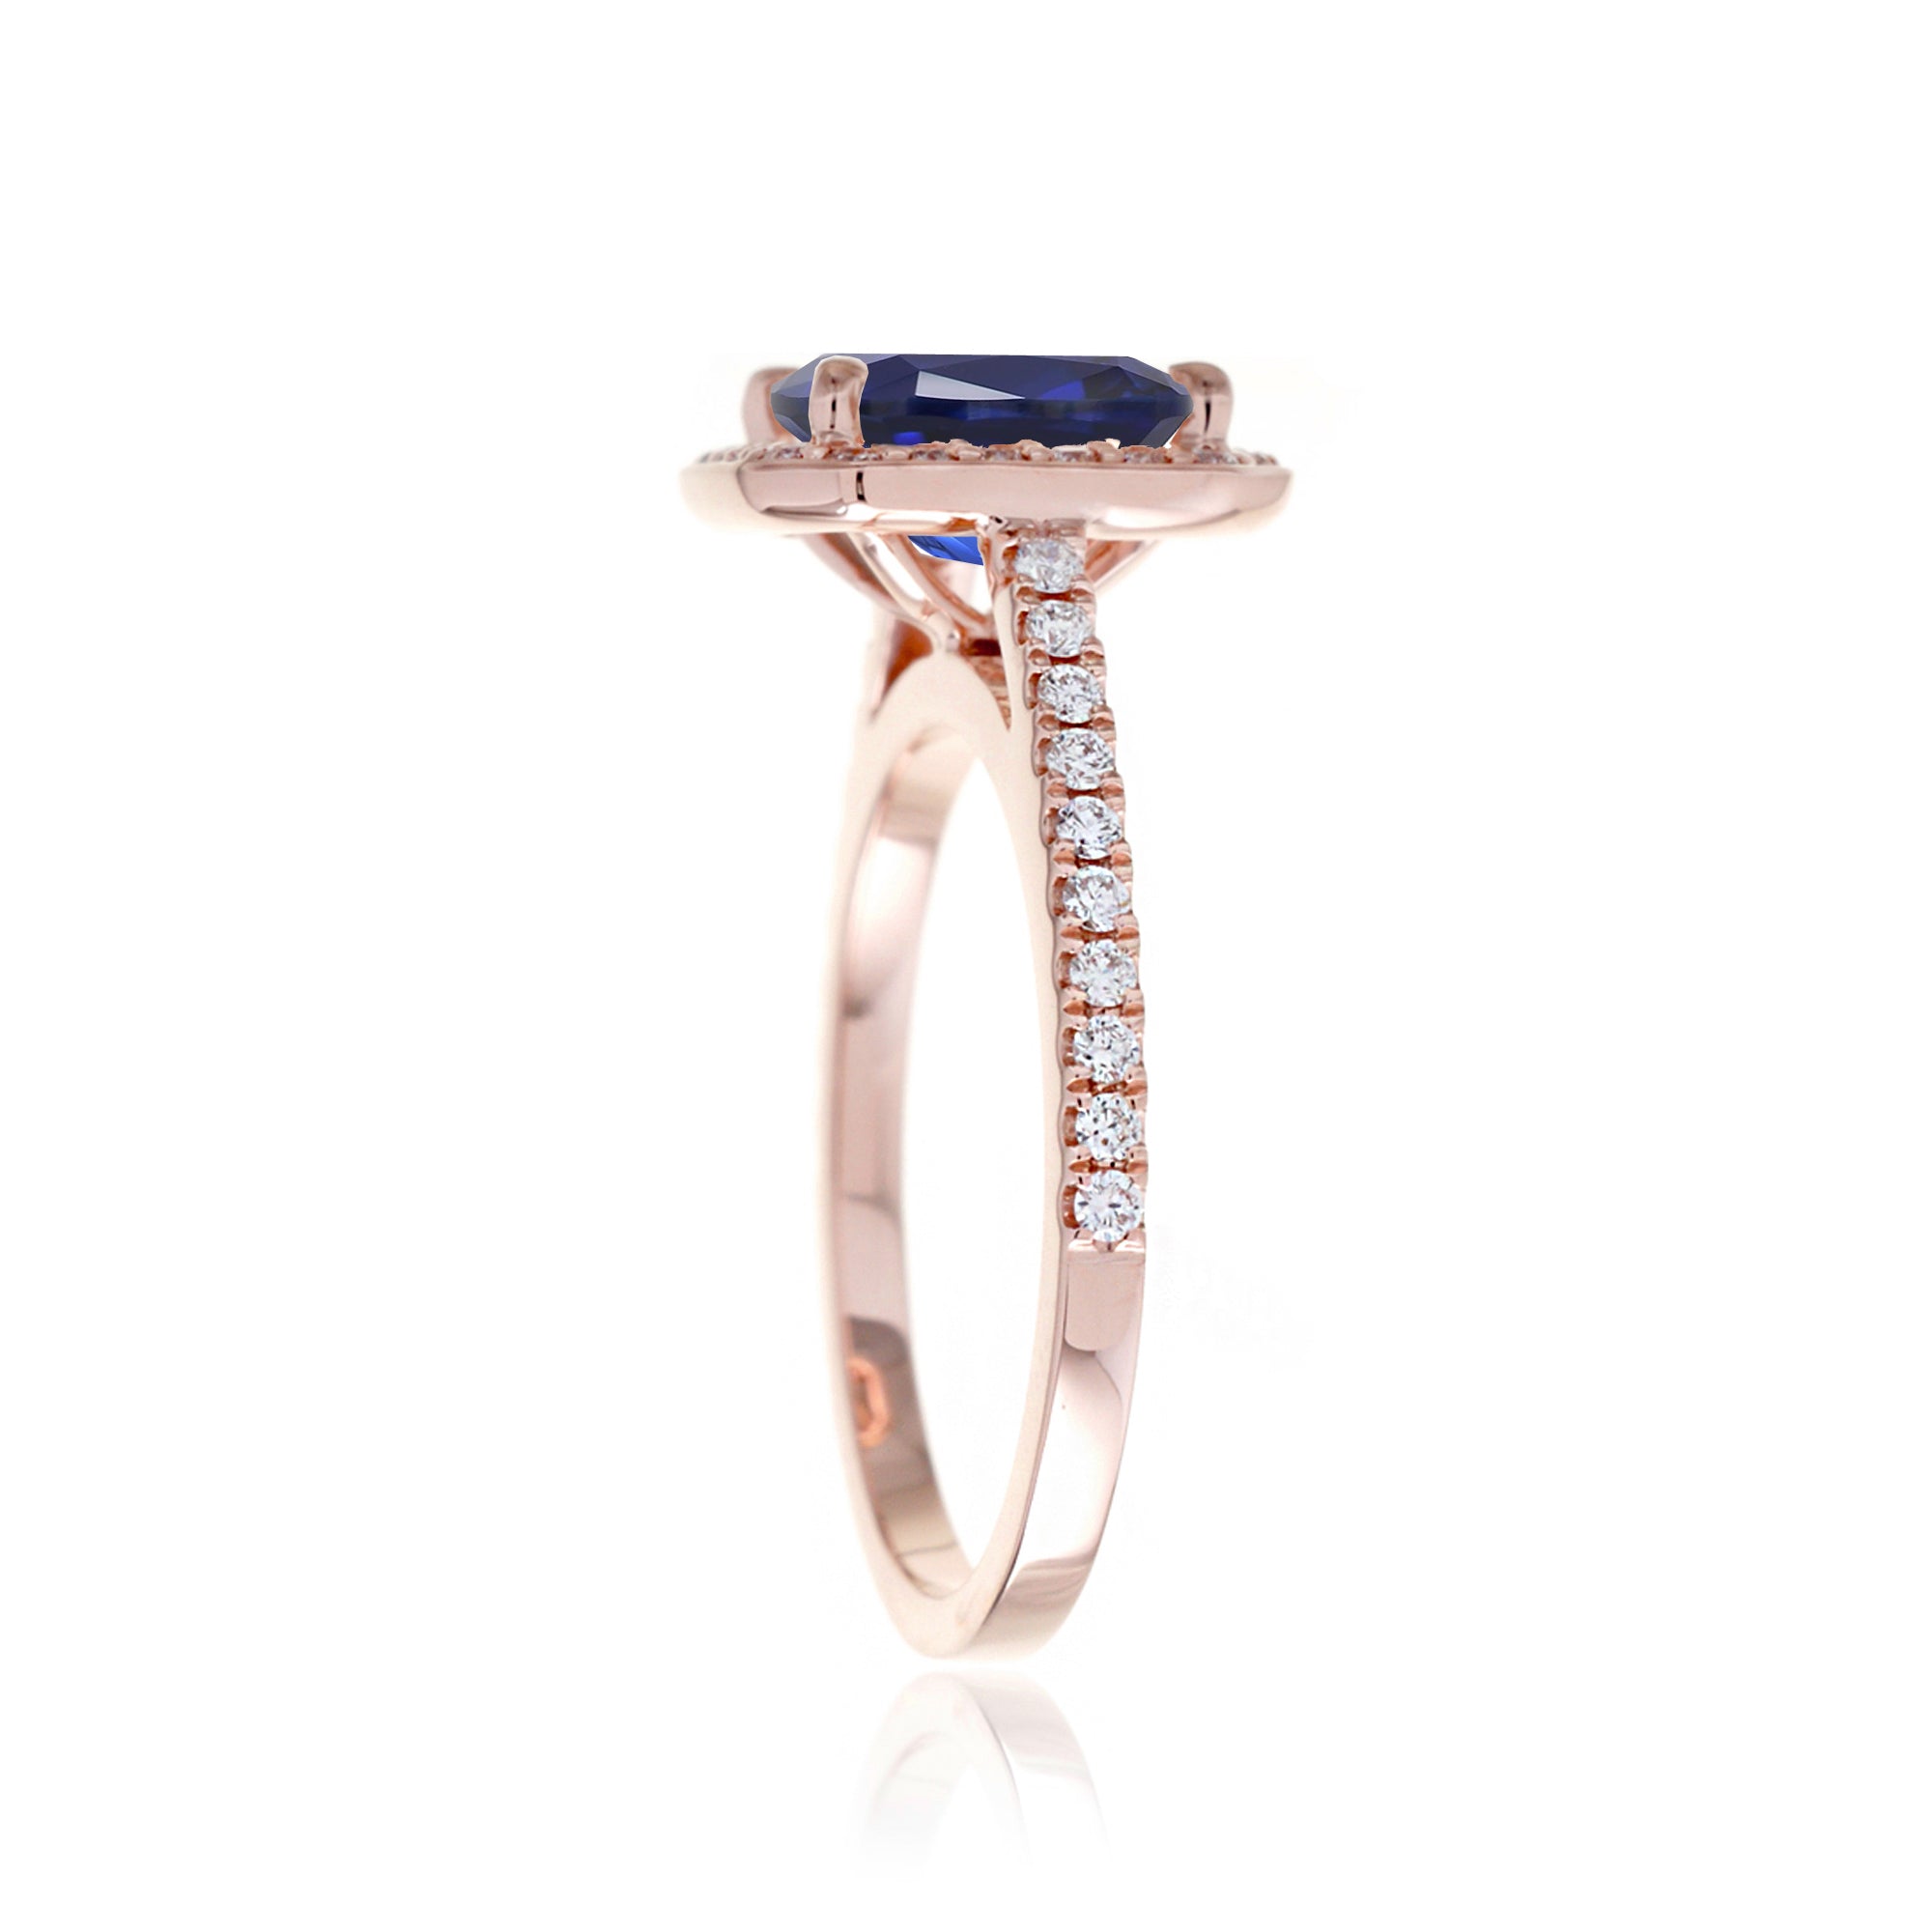 Cushion lab-grown sapphire diamond halo cathedral engagement ring - the Steffy rose gold